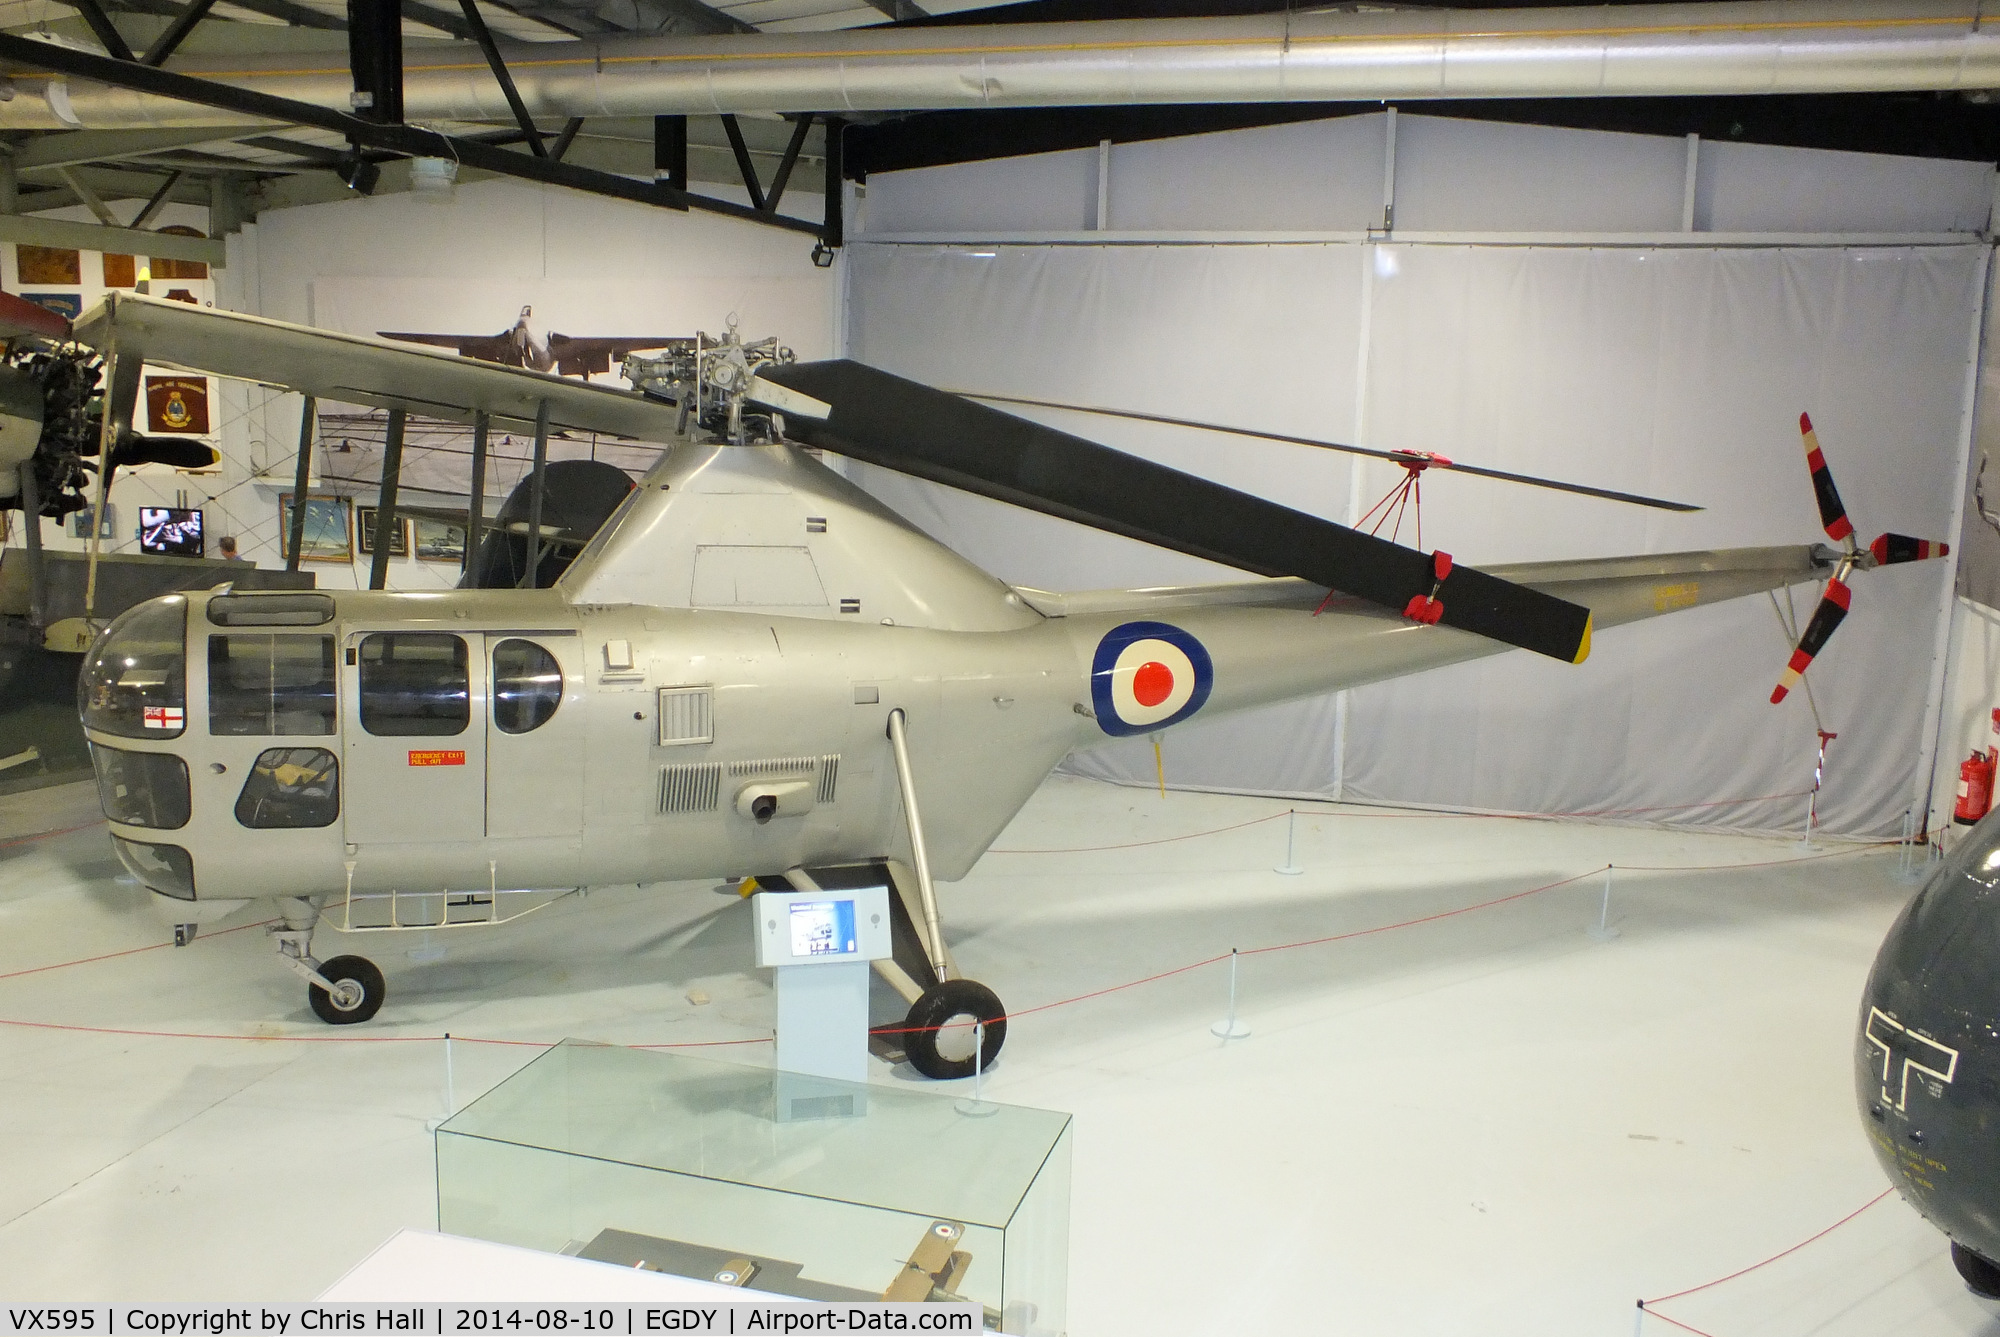 VX595, Westland Dragonfly HR.1 C/N WA/H/008, at the FAA Museum, Yeovilton